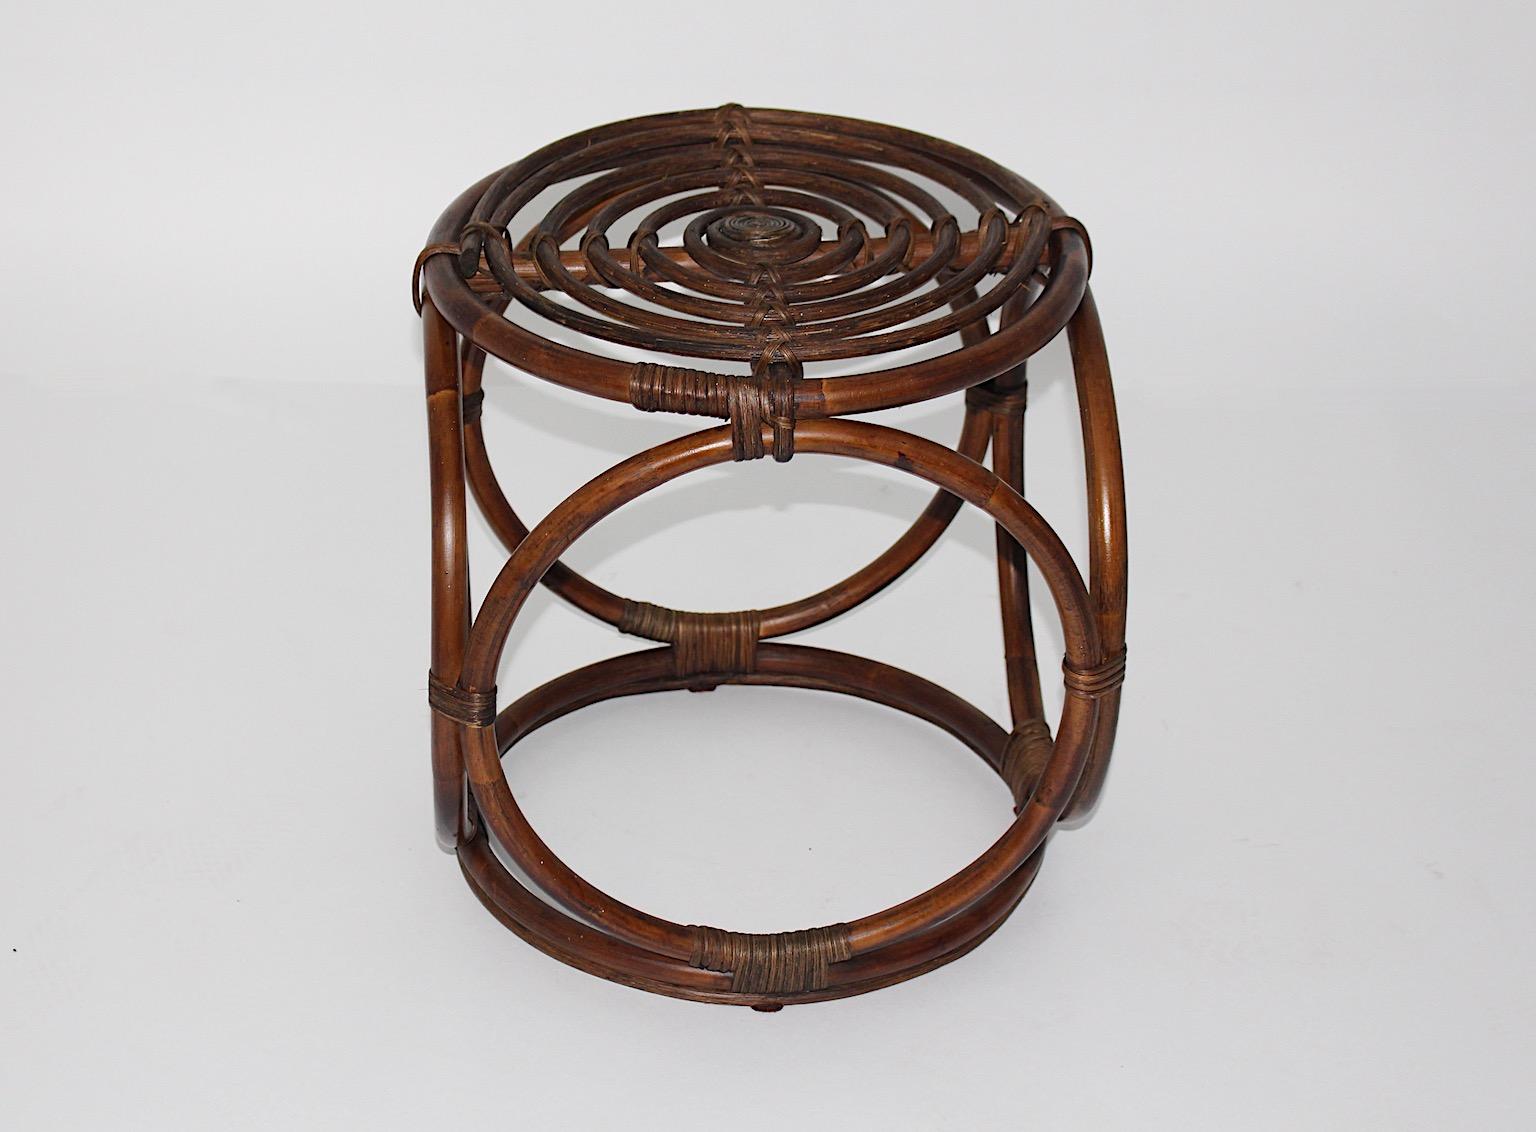 Organic Modern Riviera Style vintage stool from brown stained bamboo, 1970s, Italy.
An amazing composition from beautiful brown stained bamboo connected with bamboo rings.
This bamboo stool is characterized through wonderful patina and very good